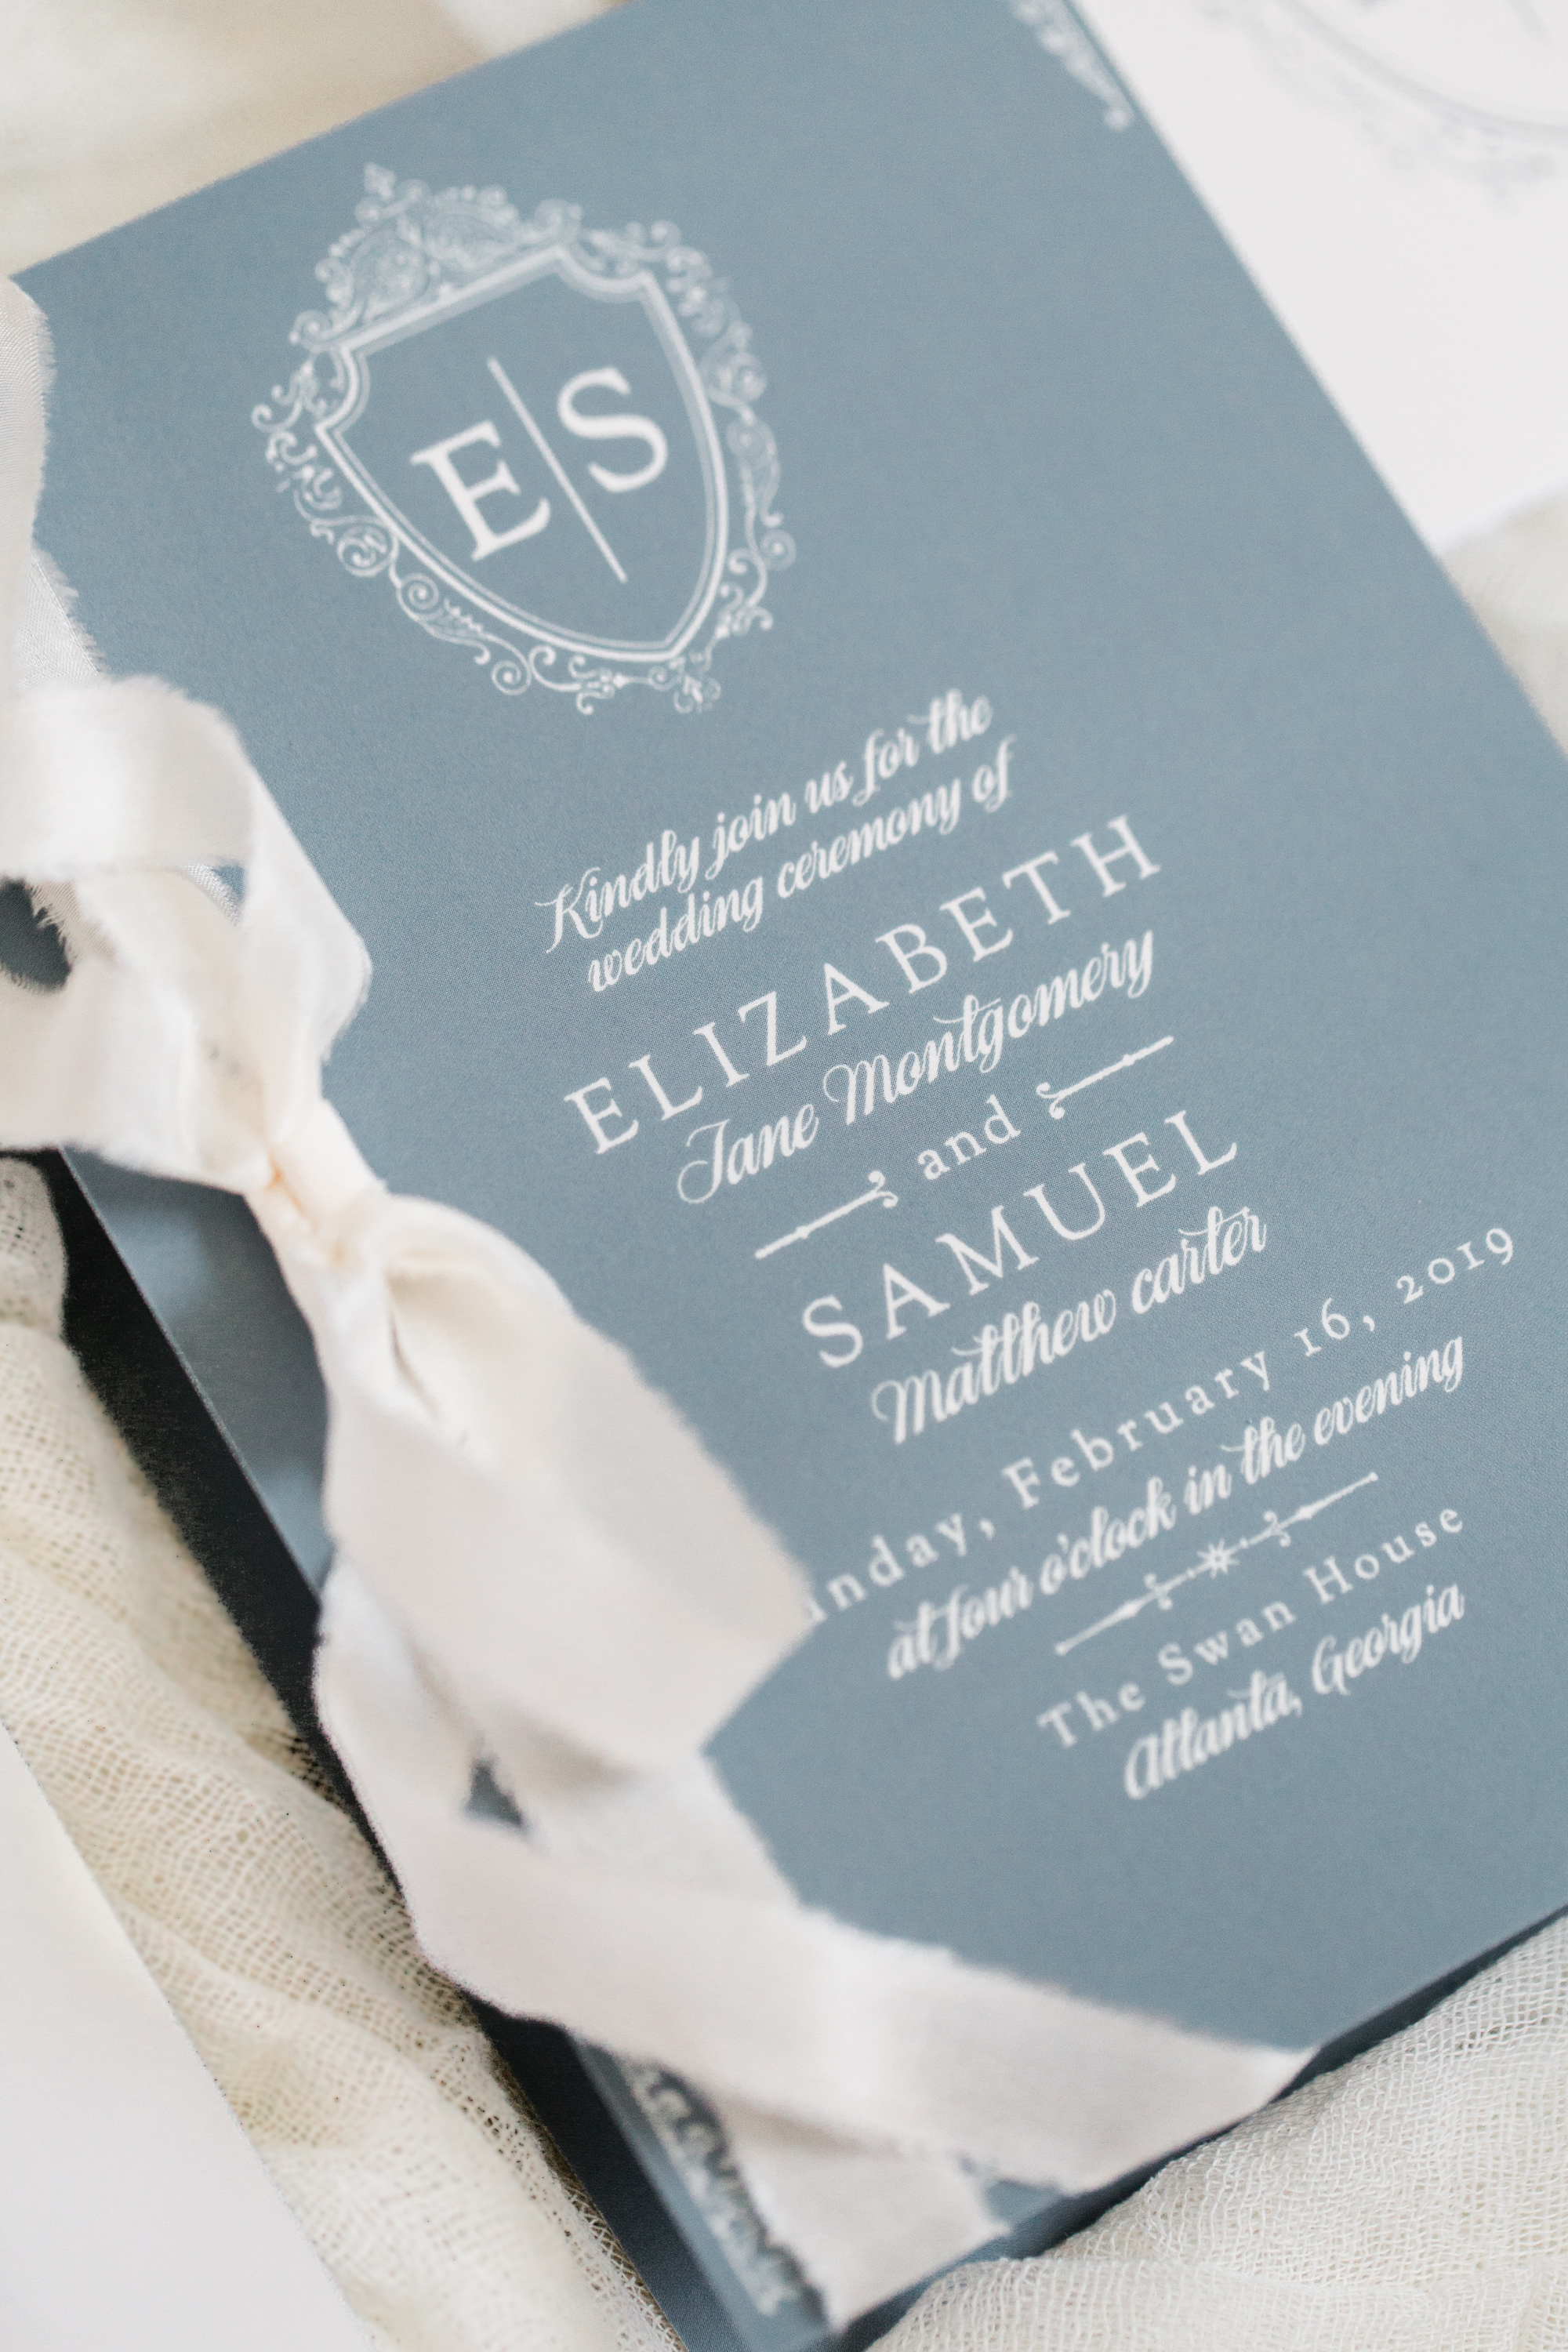 This ribbon from Frou Frou Chic adds the perfect amount of elegance to these Basic Invite Wedding Invitations.